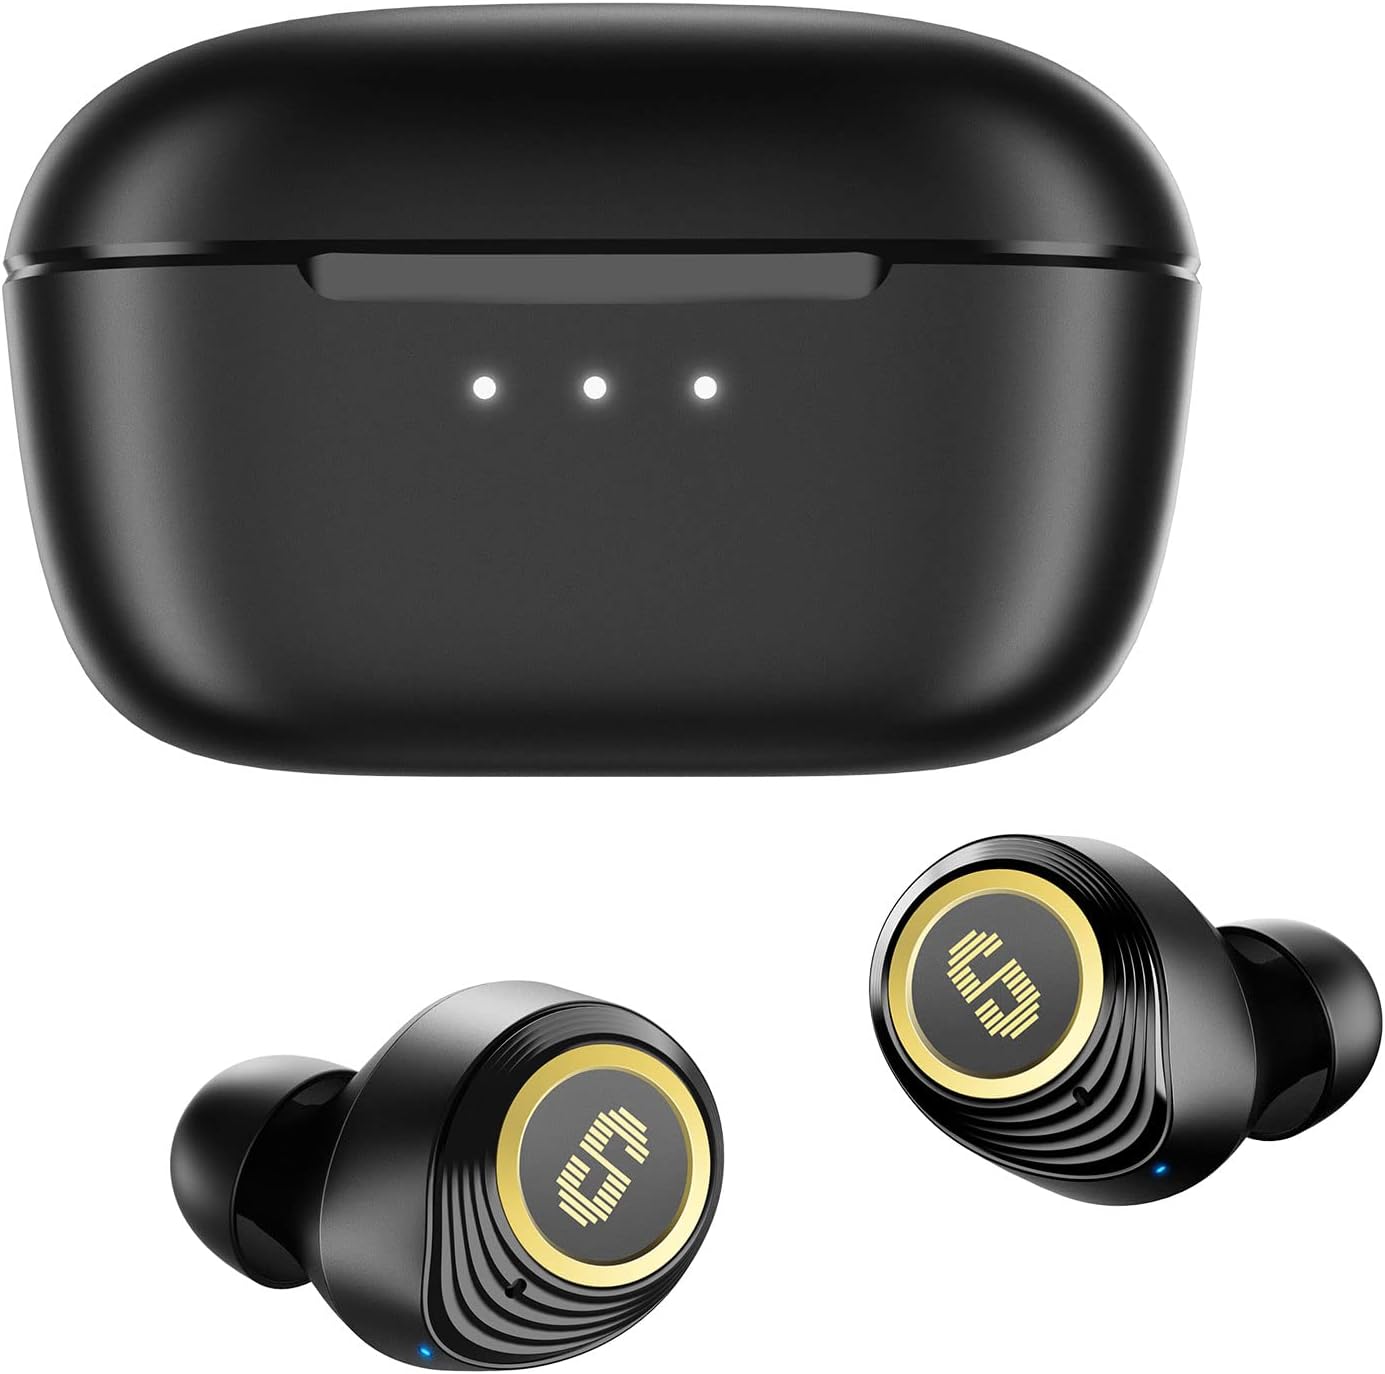 Review of SuperEQ Q2 Pro Hybrid Wireless Active Noise Cancelling Earbuds